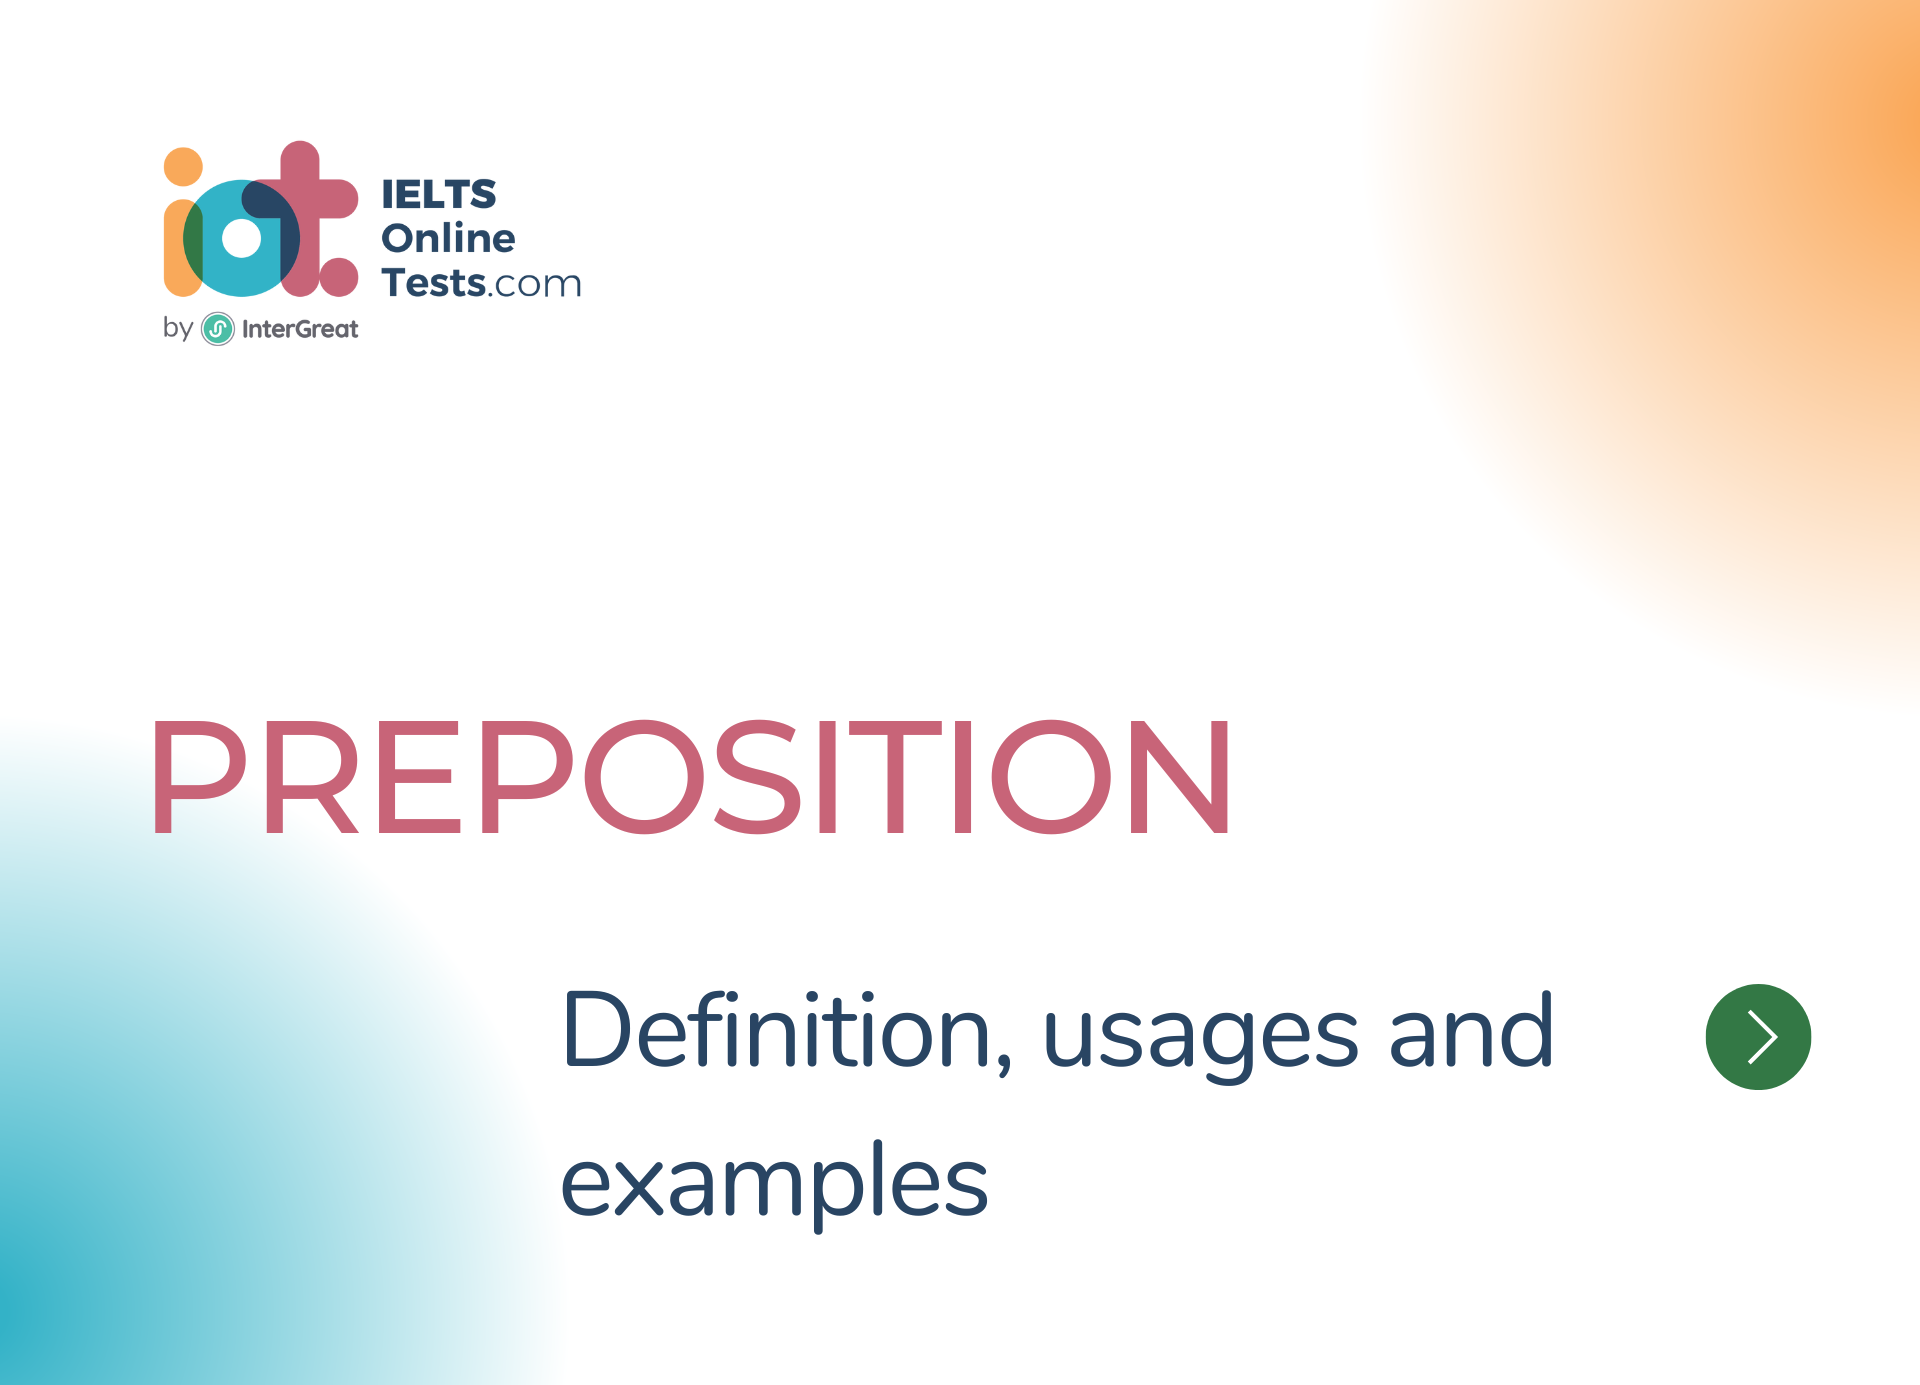 preposition-definition-usages-and-examples-ielts-online-tests